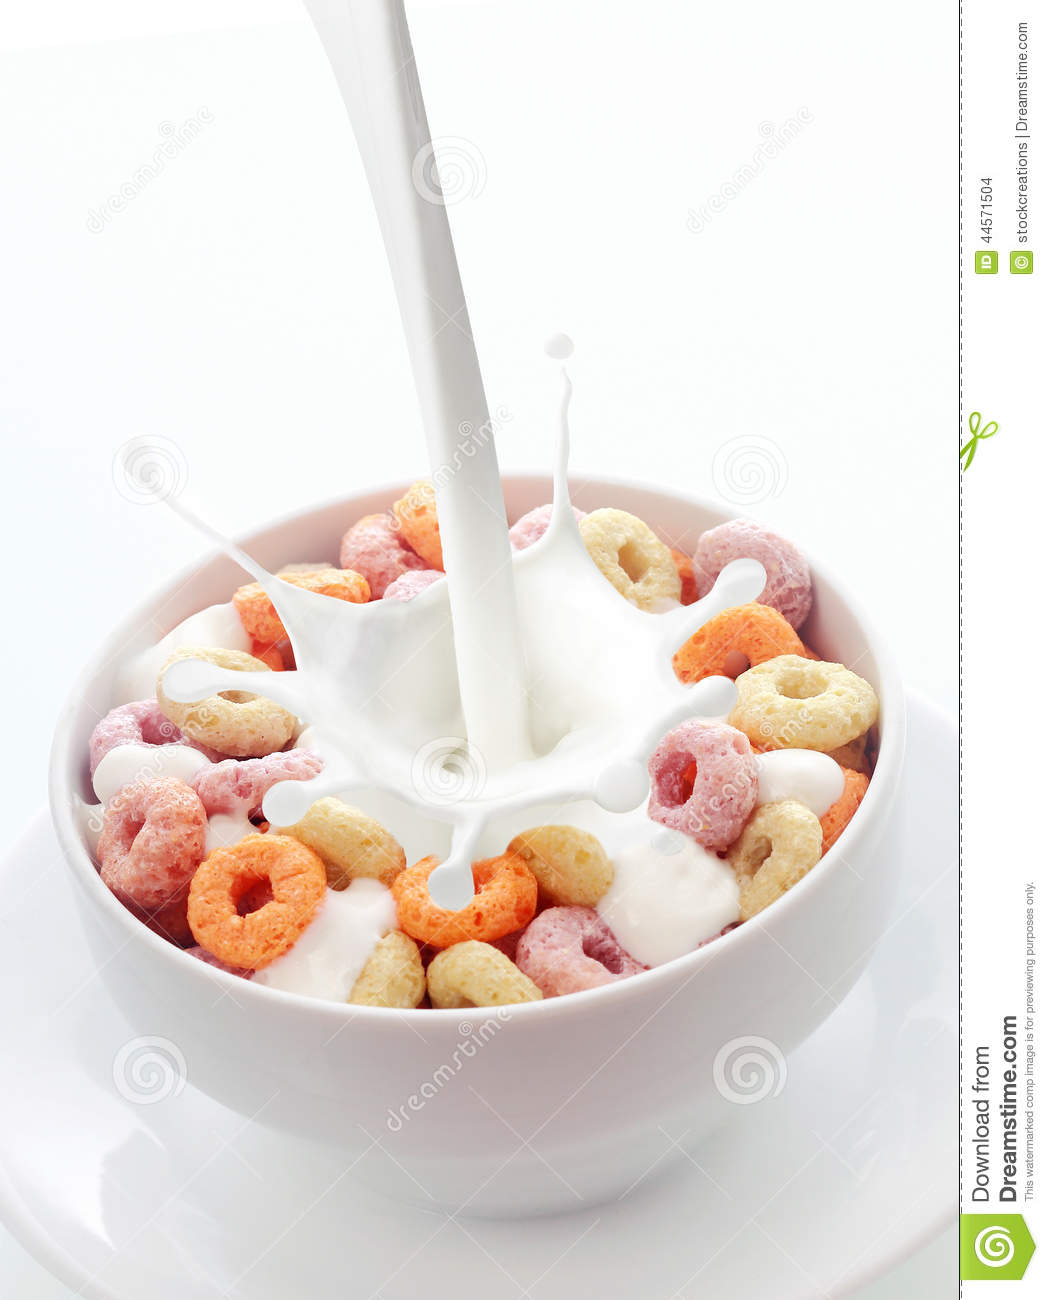 Fresh Creamy Milk Into A Bowl Of Colorful Fruit Loops Breakfast Cereal    